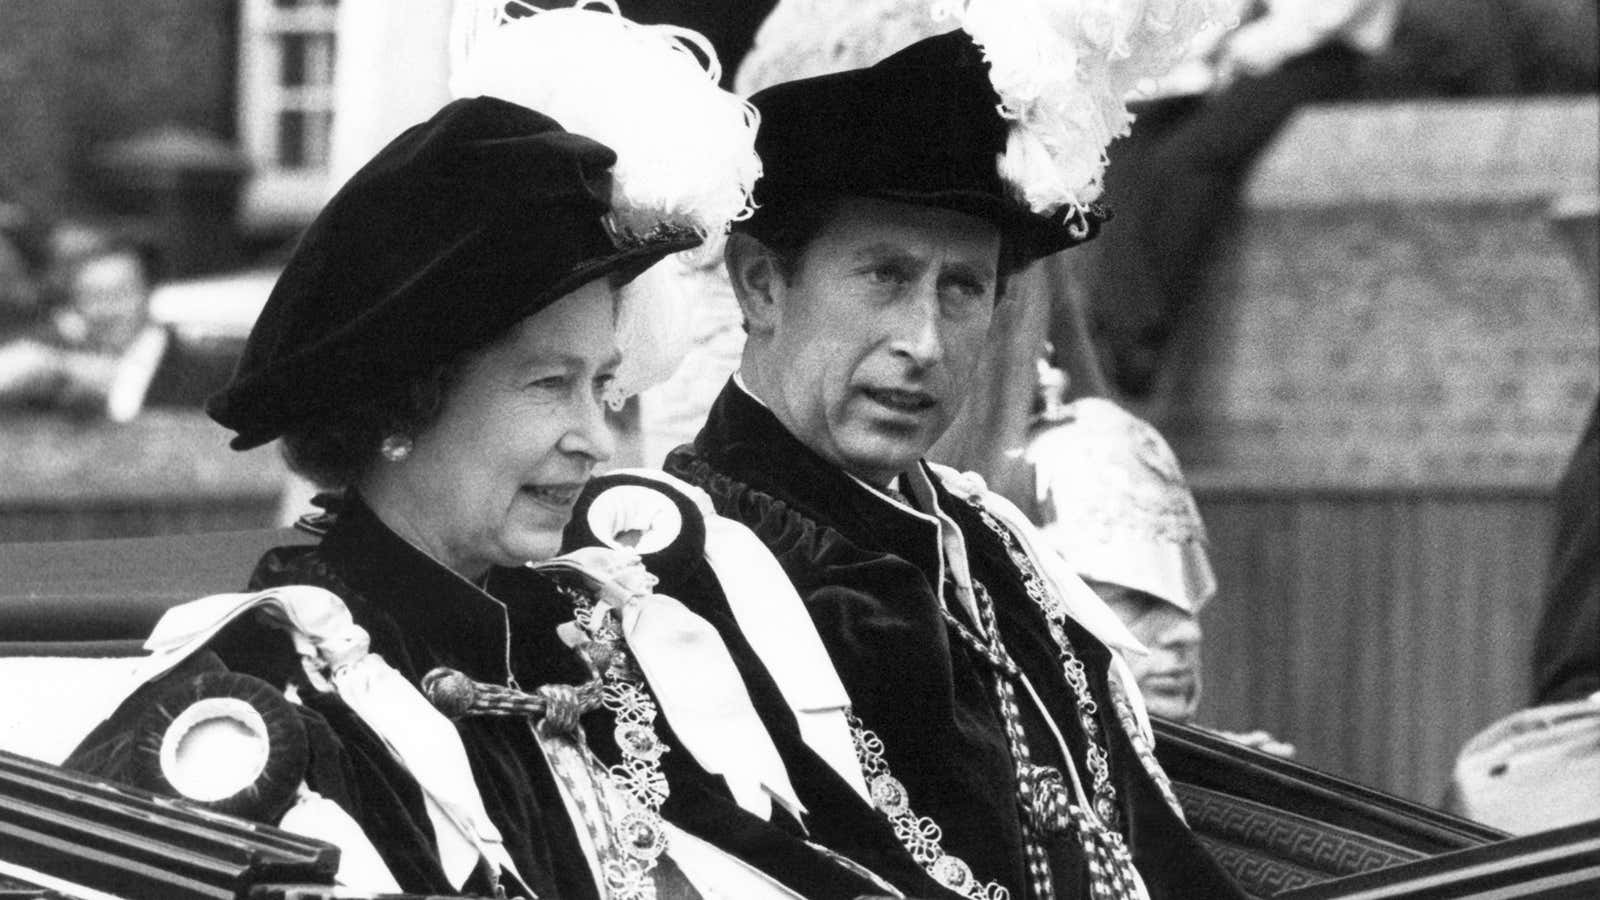 Prince Charles at 70: Pictures of his decades as heir apparent